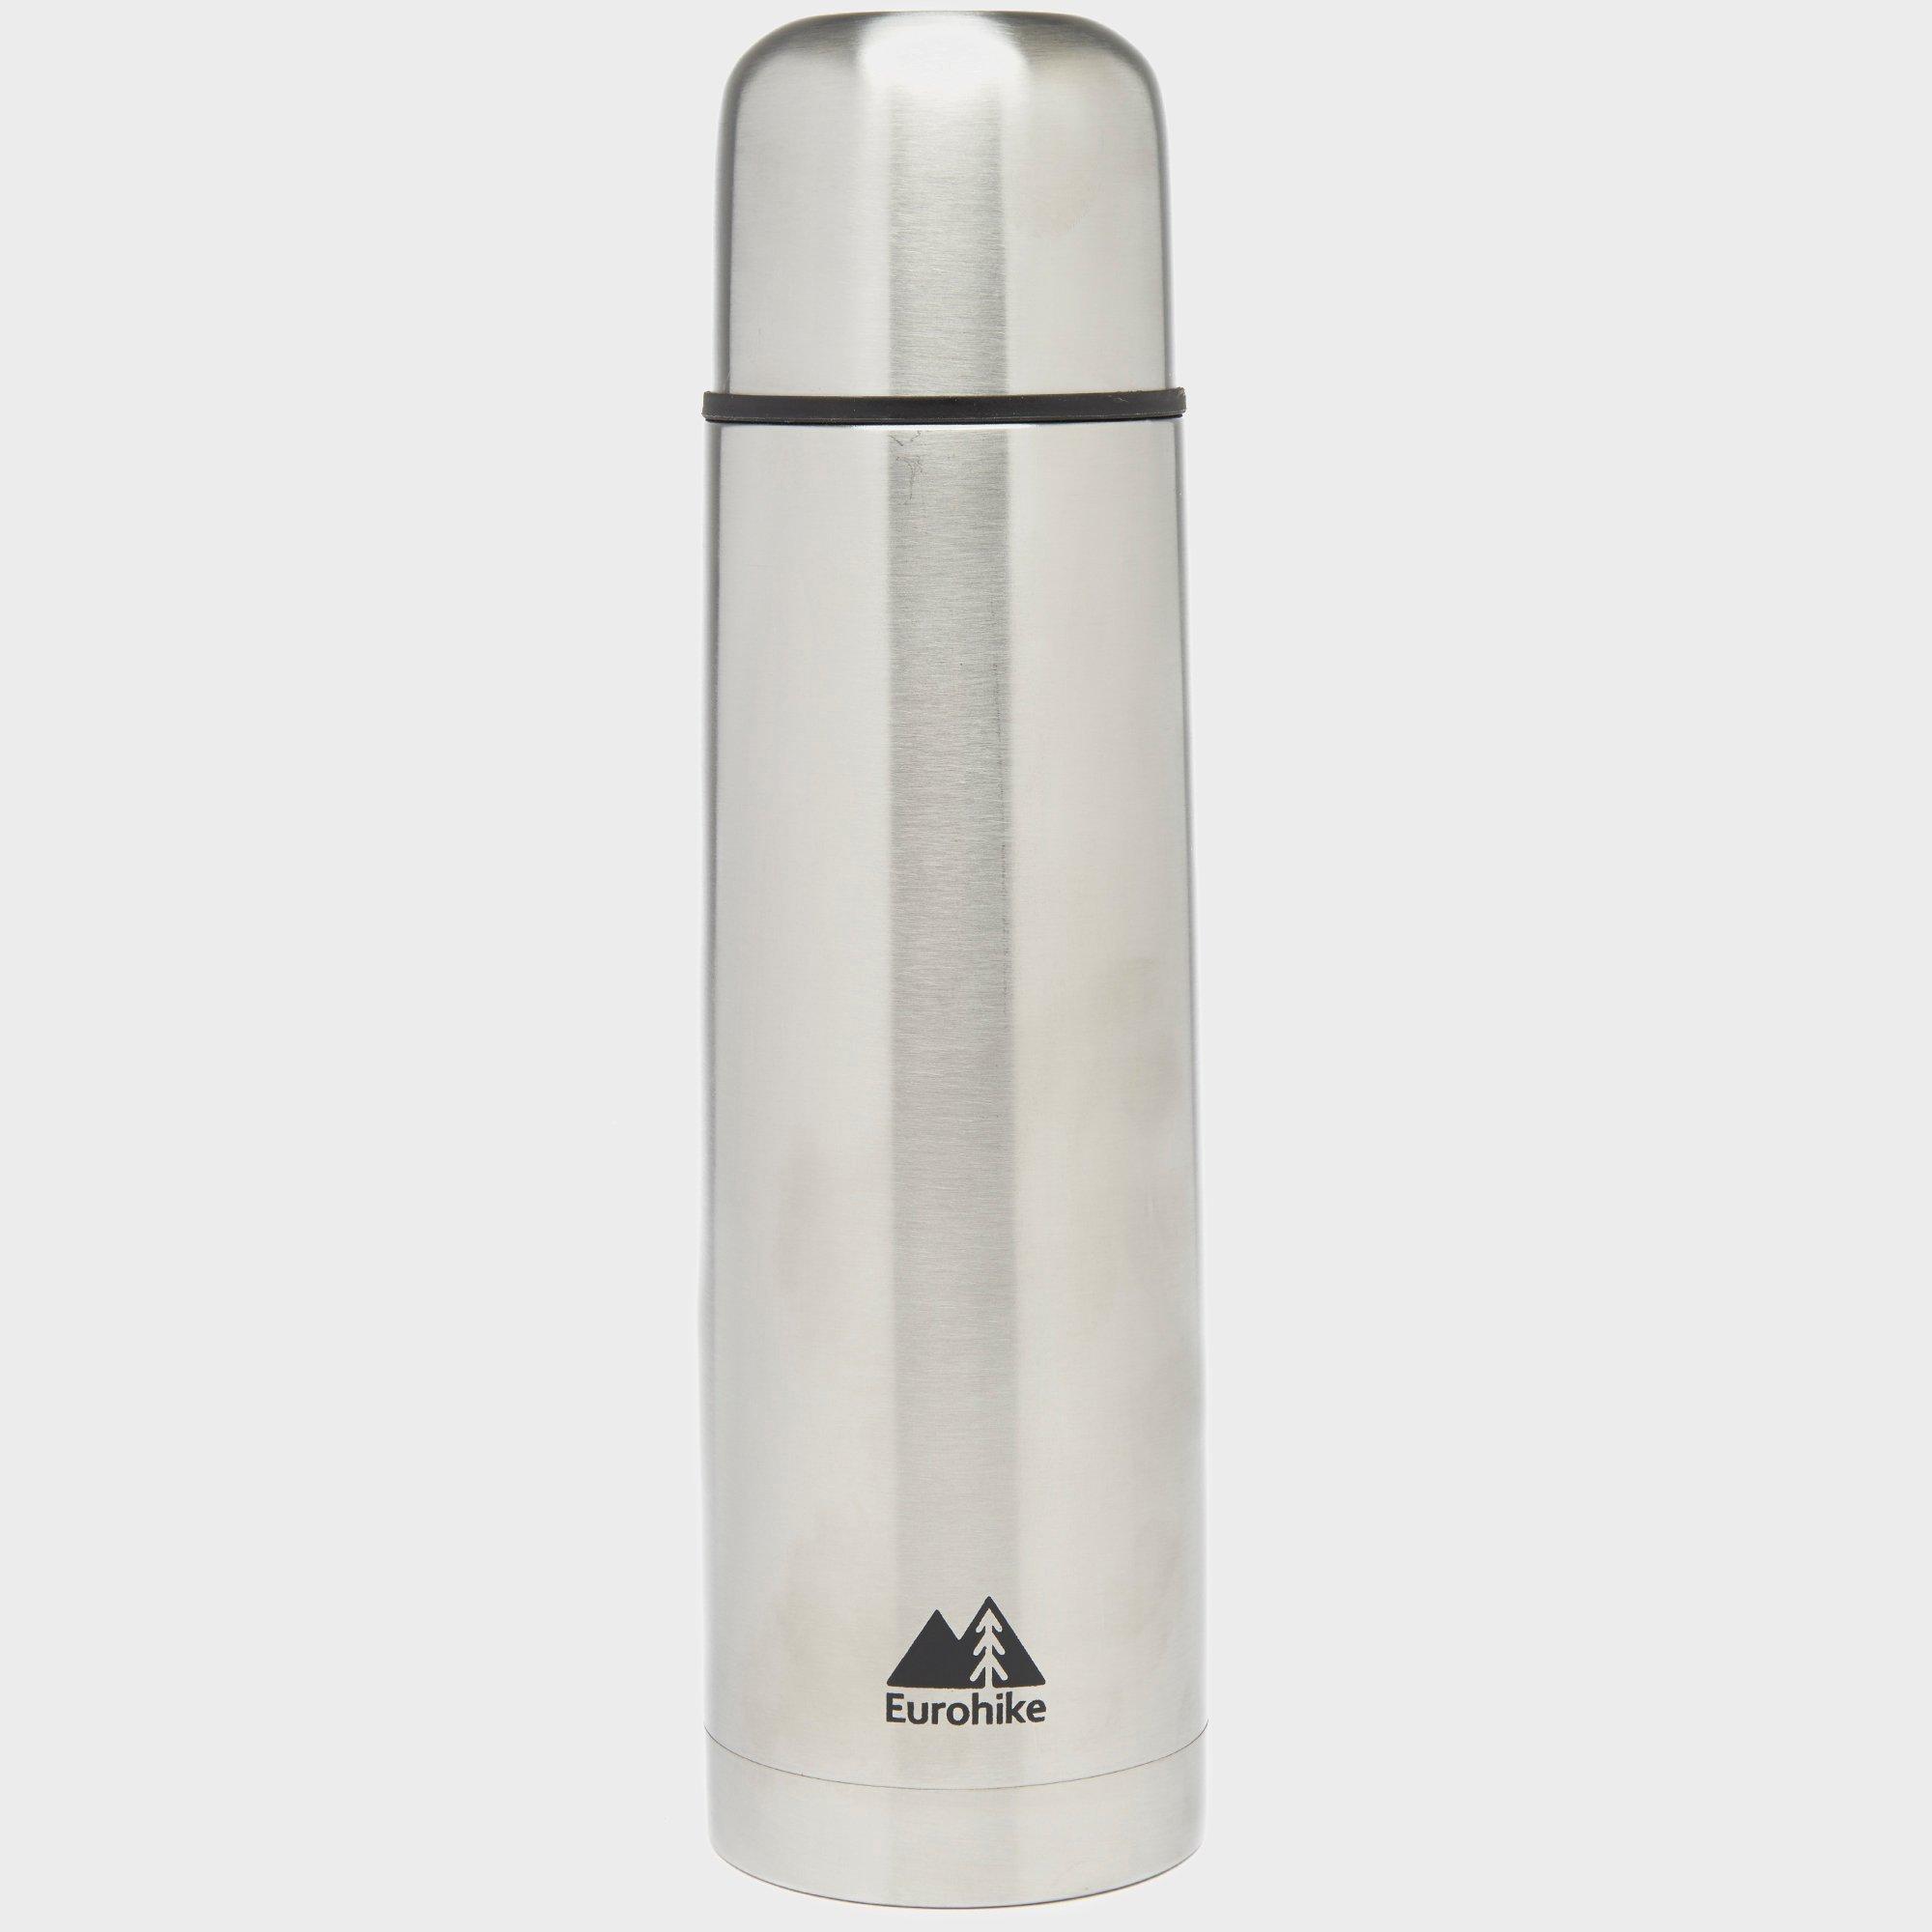 Eurohike Stainless Steel Flask 750ml - Sil  Sil